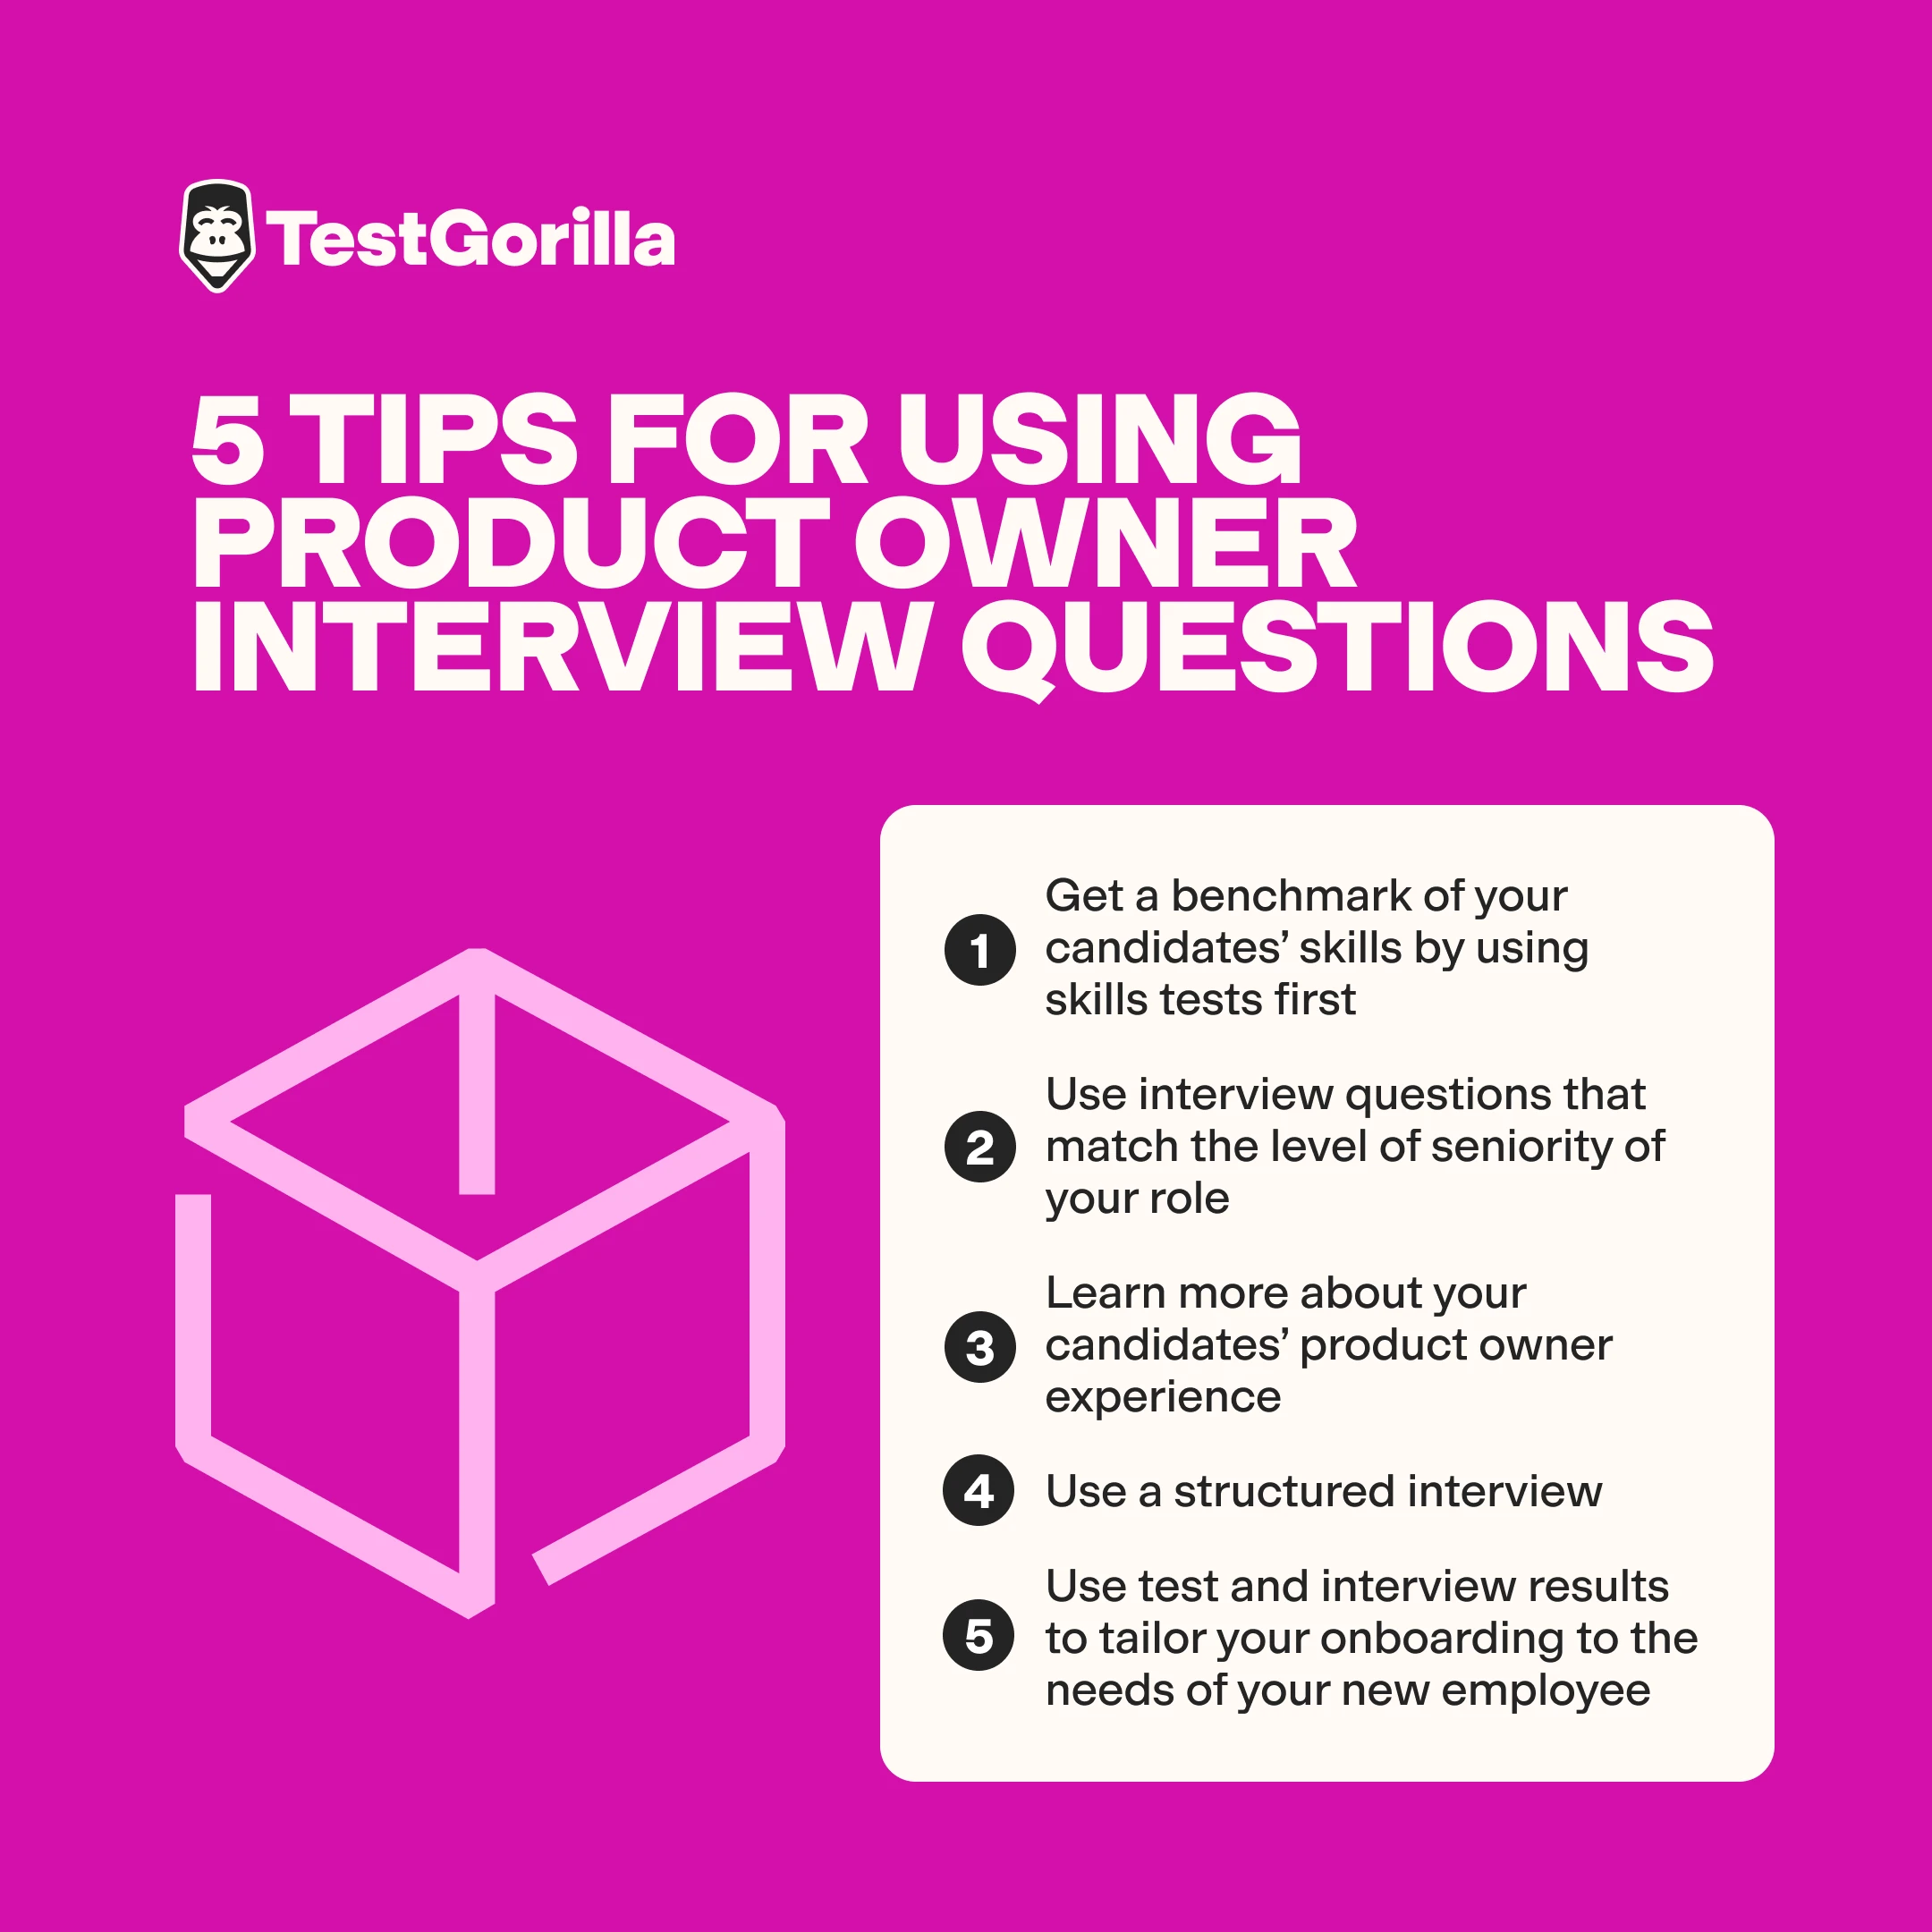 5 tips for using product owner interview questions